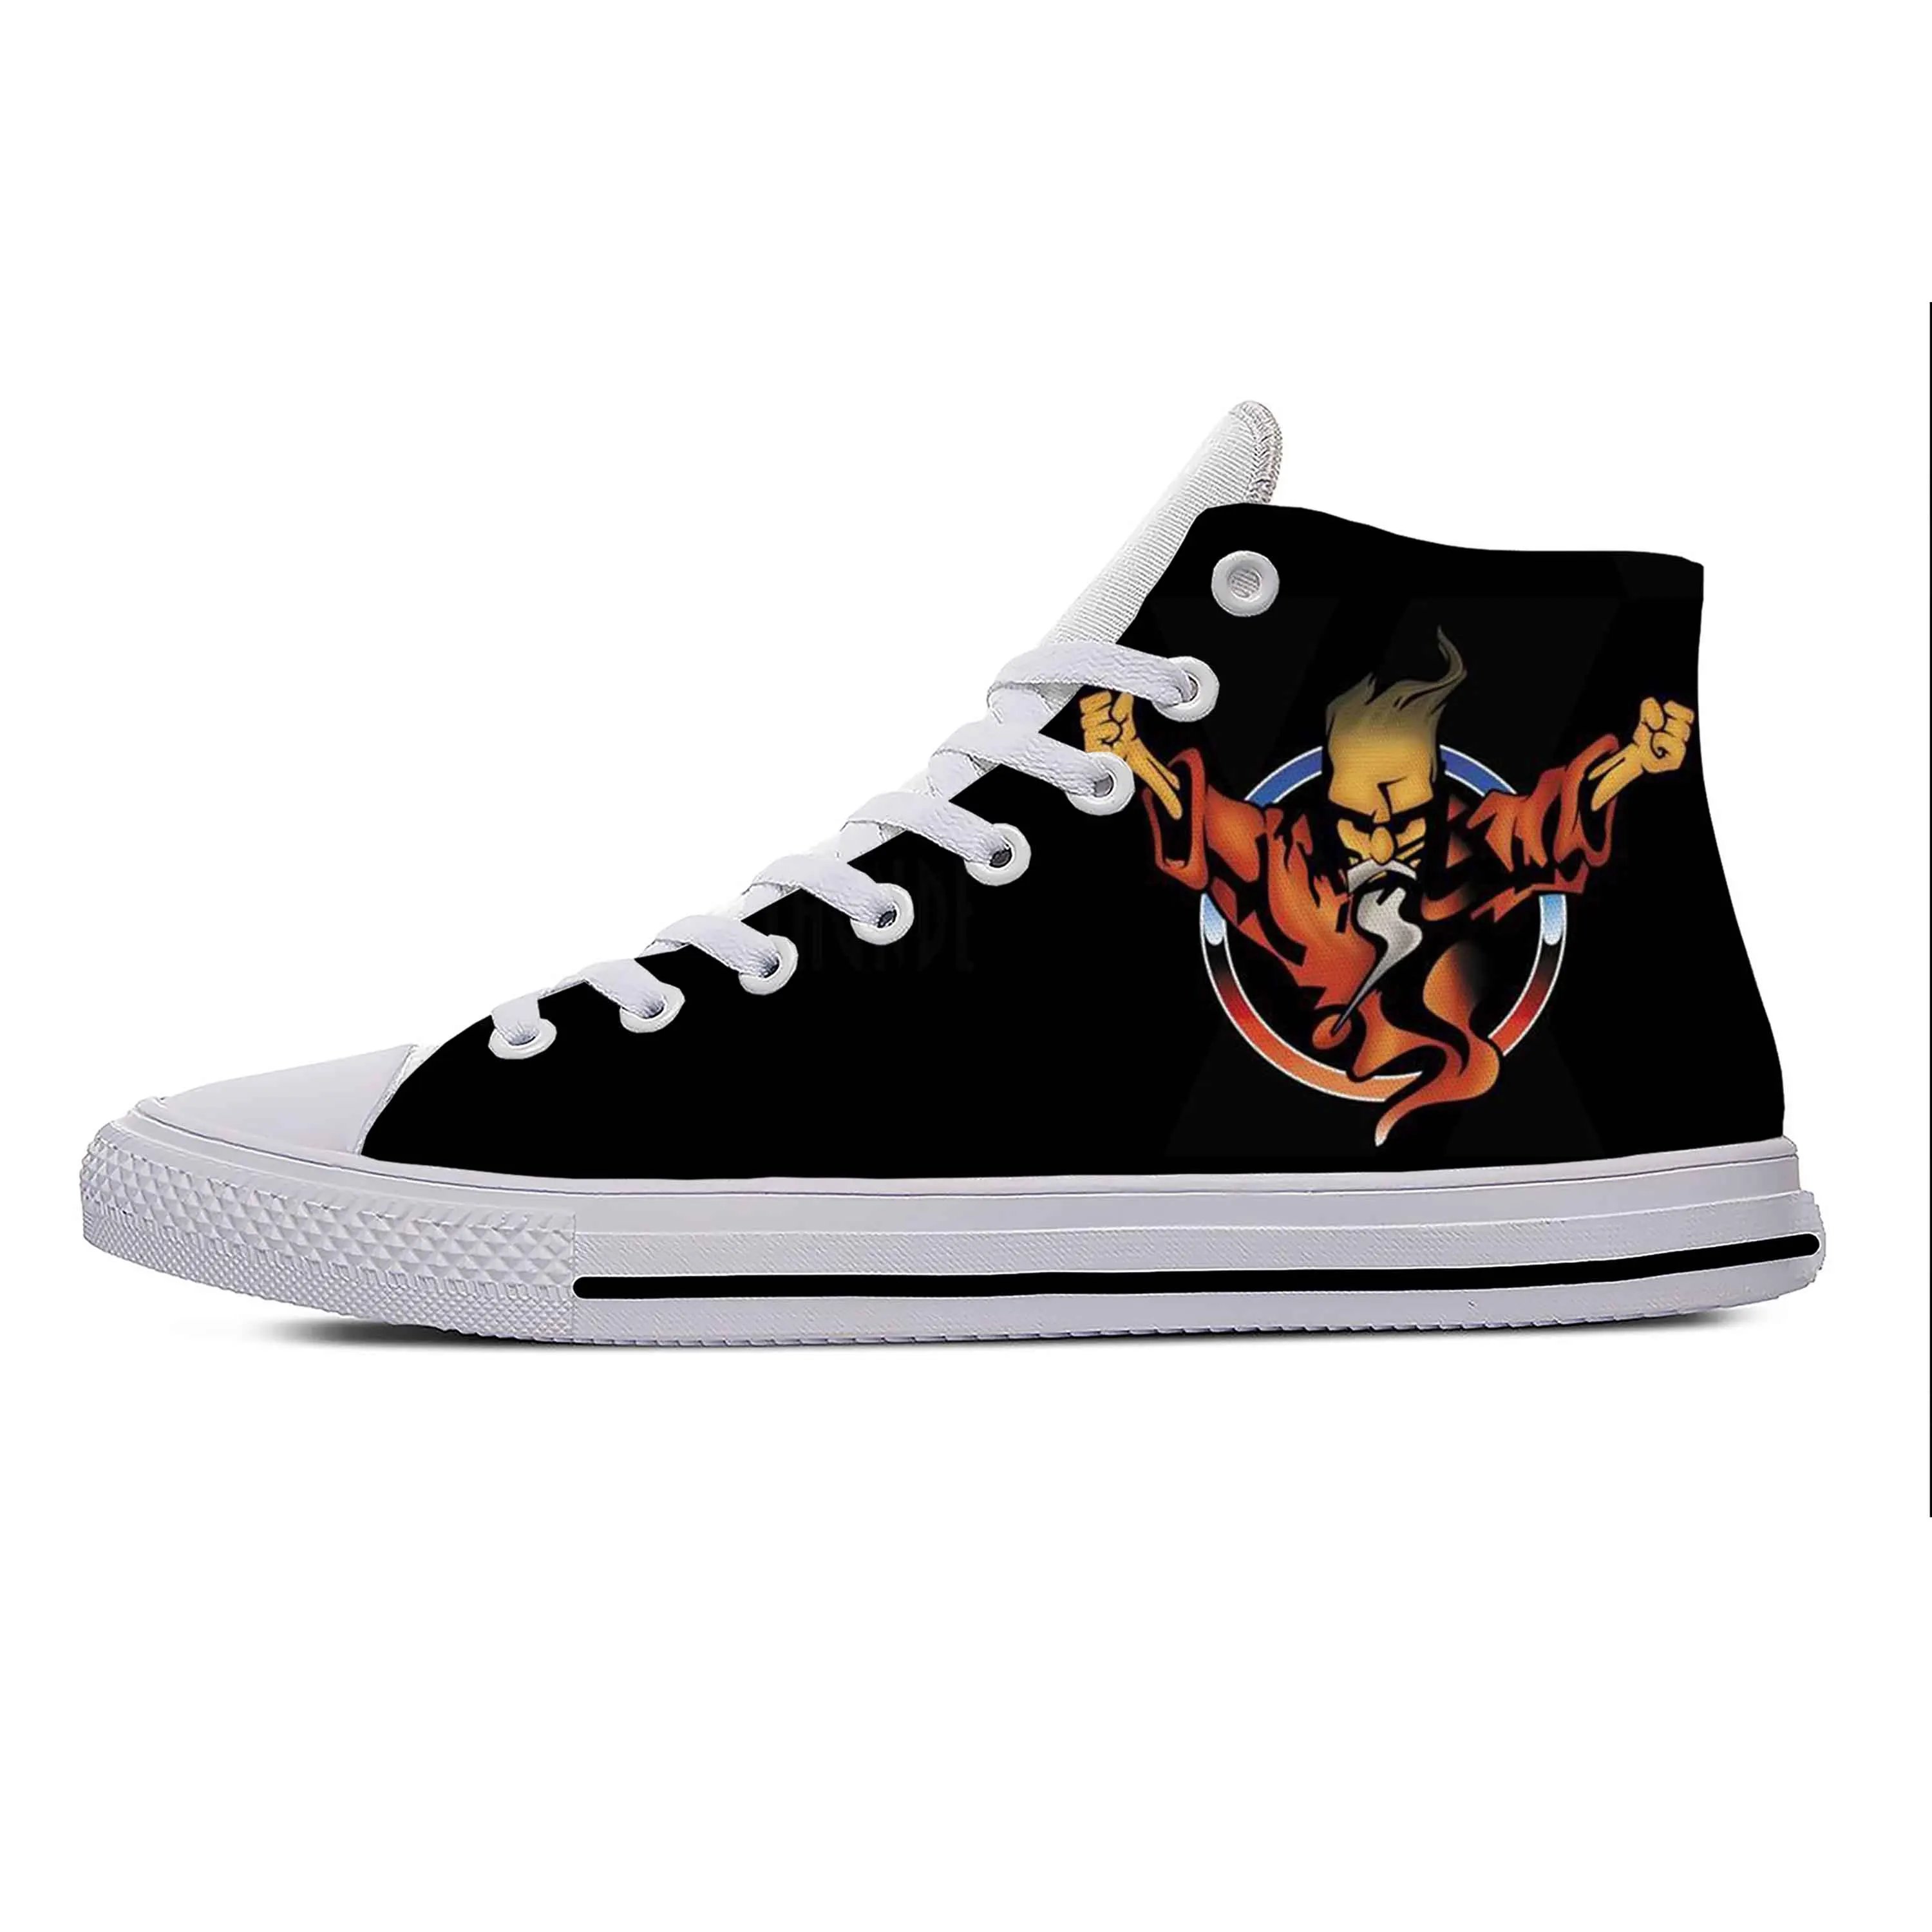 

Harder Styles Hardstyle Hardcore Rave Thunderdome Casual Cloth Shoes High Top Lightweight Breathable 3D Print Men Women Sneakers